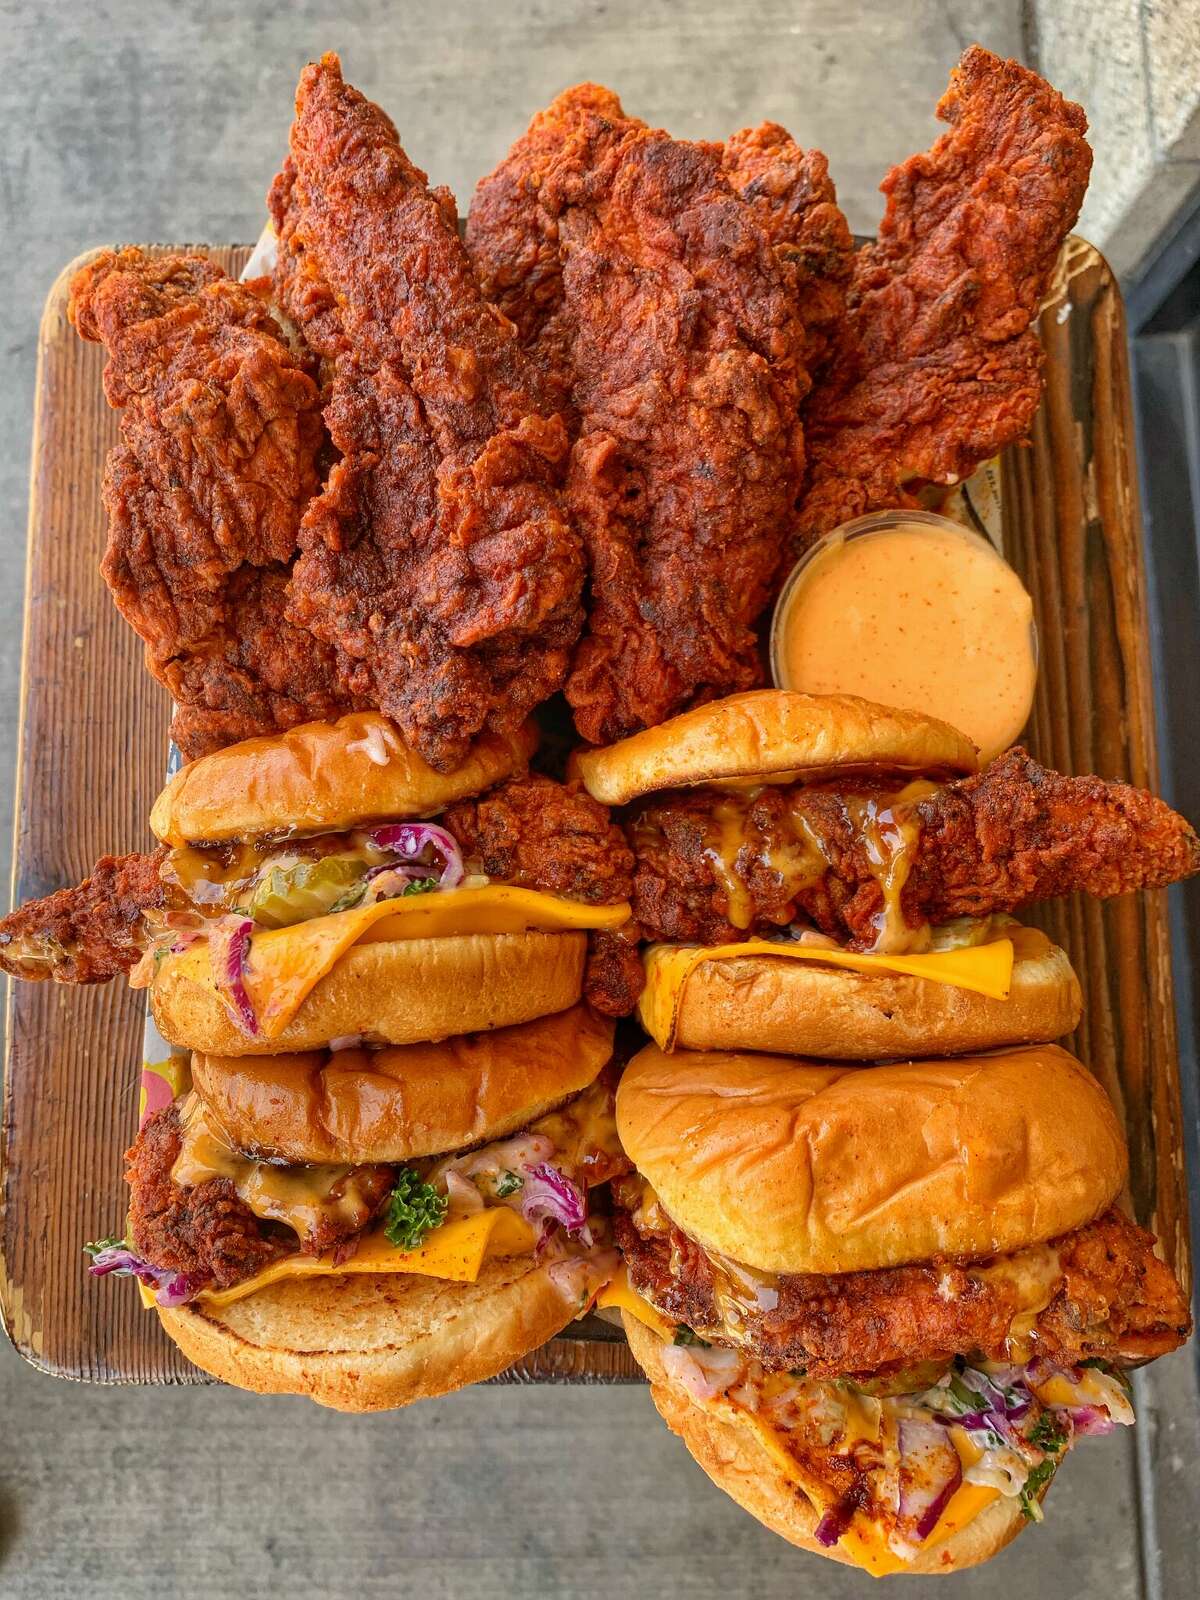 Dave's Hot Chicken specializes in chicken tenders and sliders, in a range of spice levels all the way up to "Reaper."